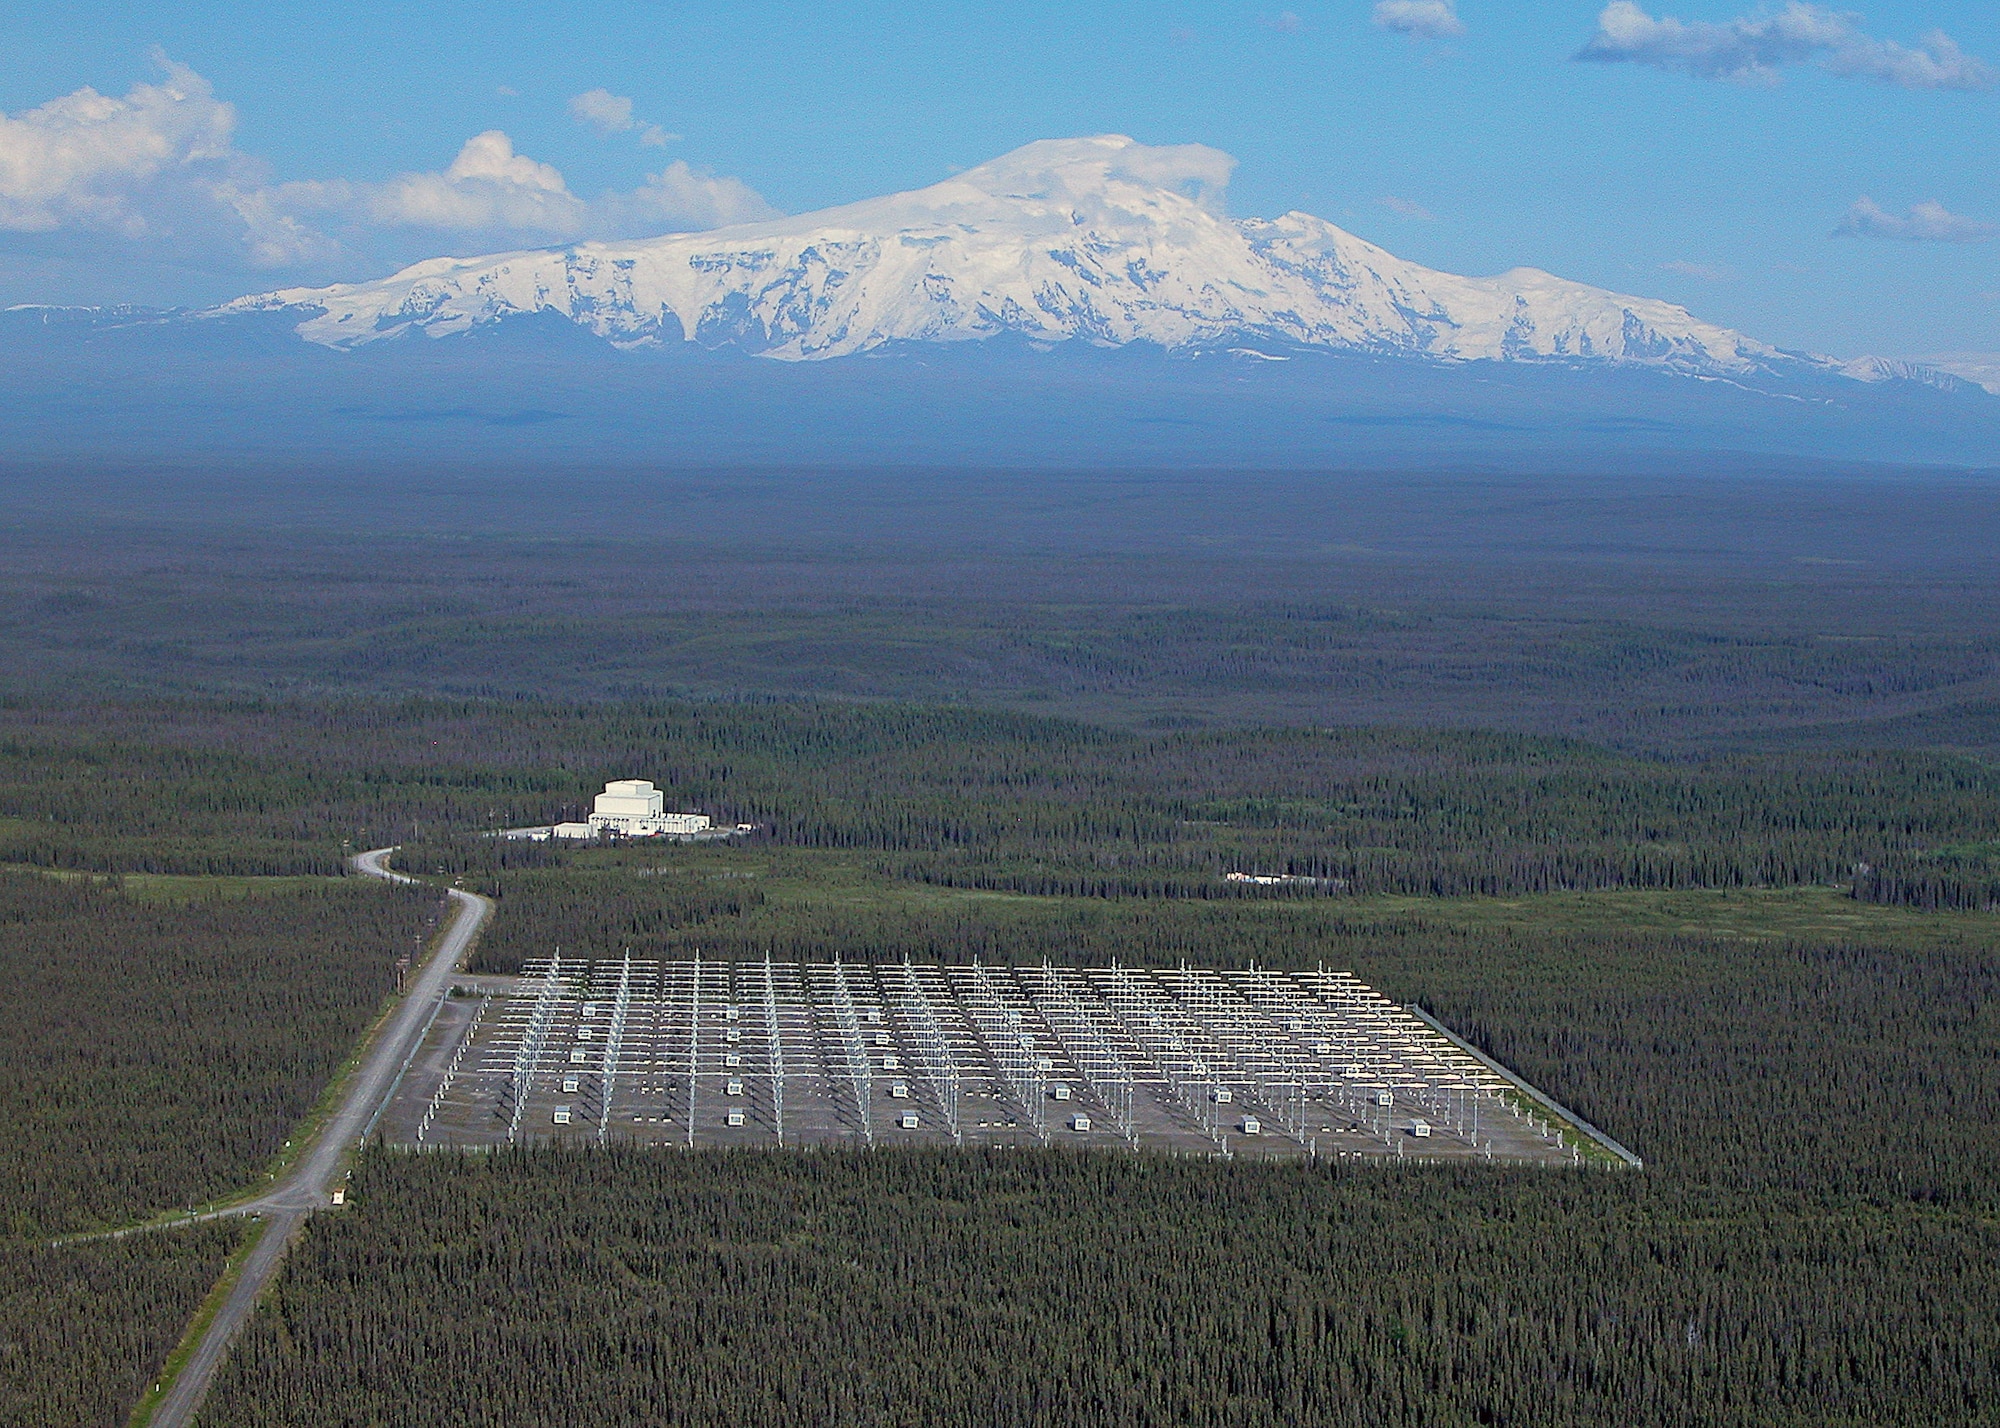 The High Frequency Active Auroral Research Program site, Gakona, Alaska, is pictured with Mount Wrangell in the background.

U.S. Air Force photograph
